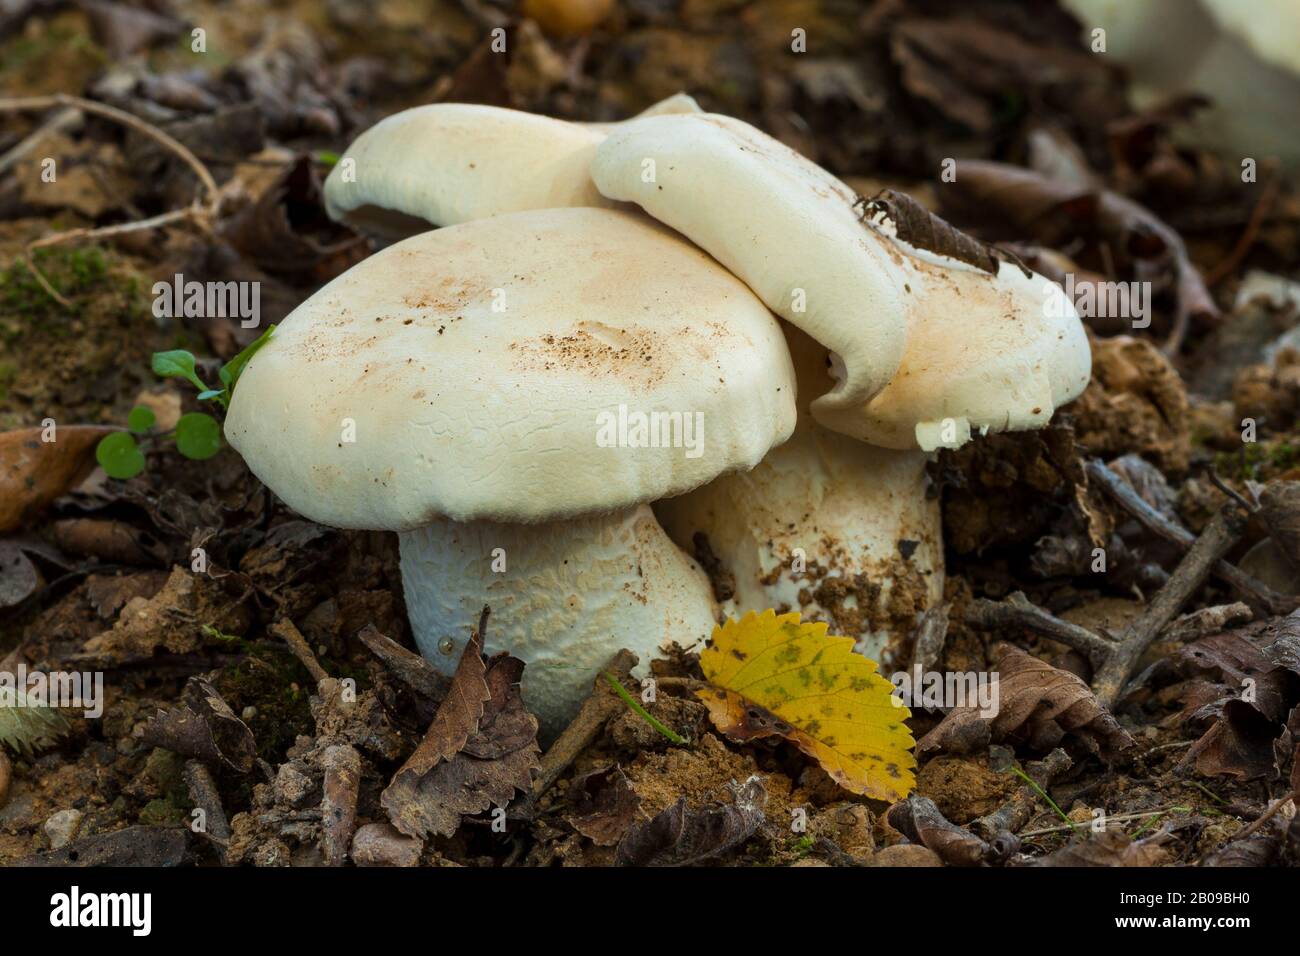 Clitopilus prunulus, known as the sweet bread mushroom, which grows in the forest among the fallen leaves. Spain Stock Photo